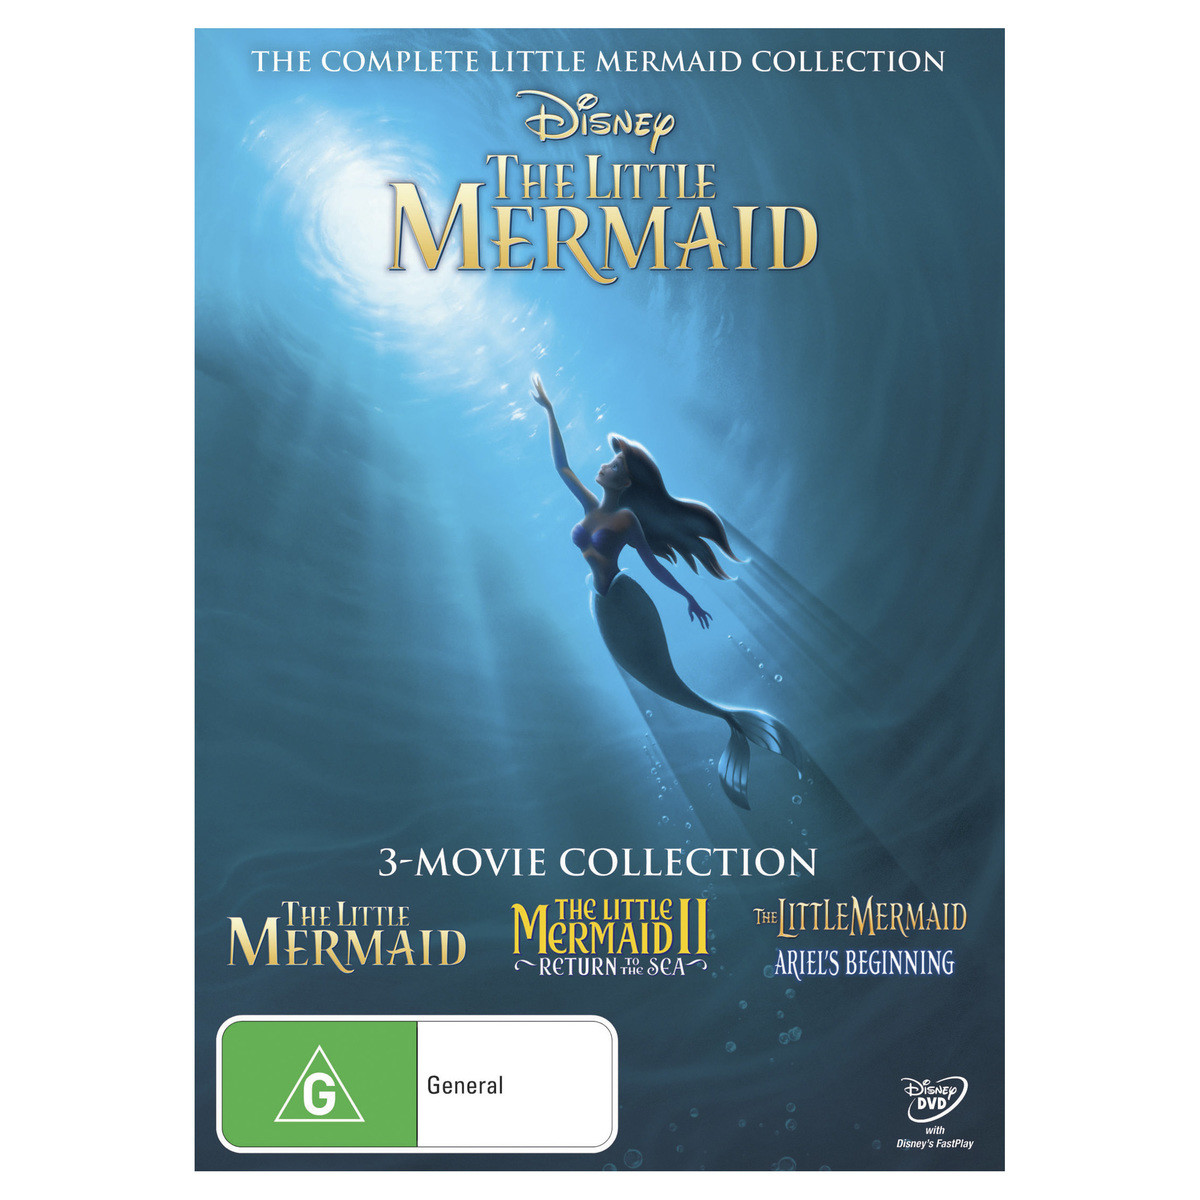 The Complete Little Mermaid Collection - DVD